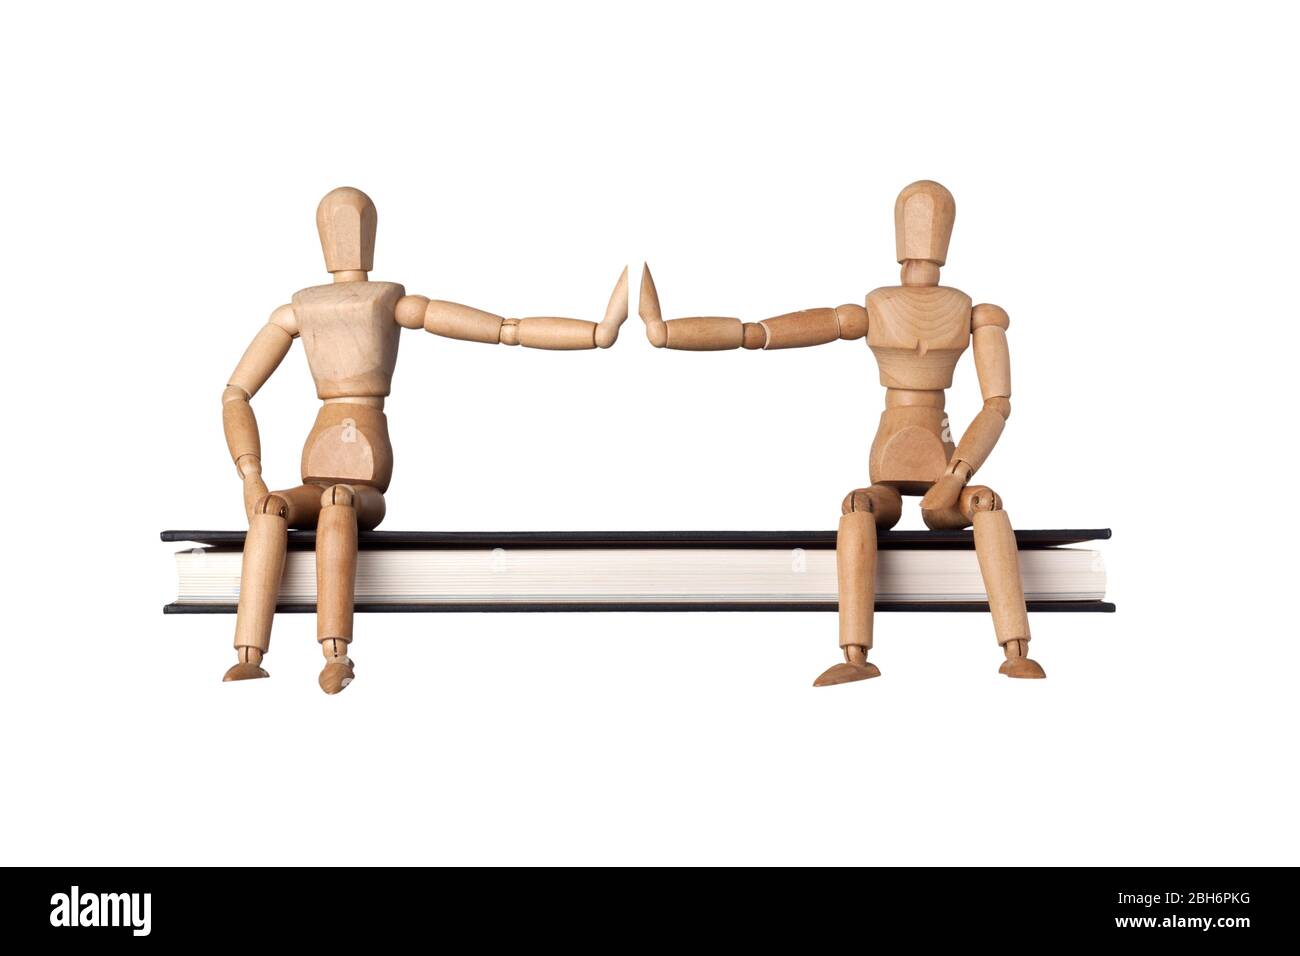 Two mannequins with outstretched arms demonstrating social distancing isolated on white background; Stock Photo